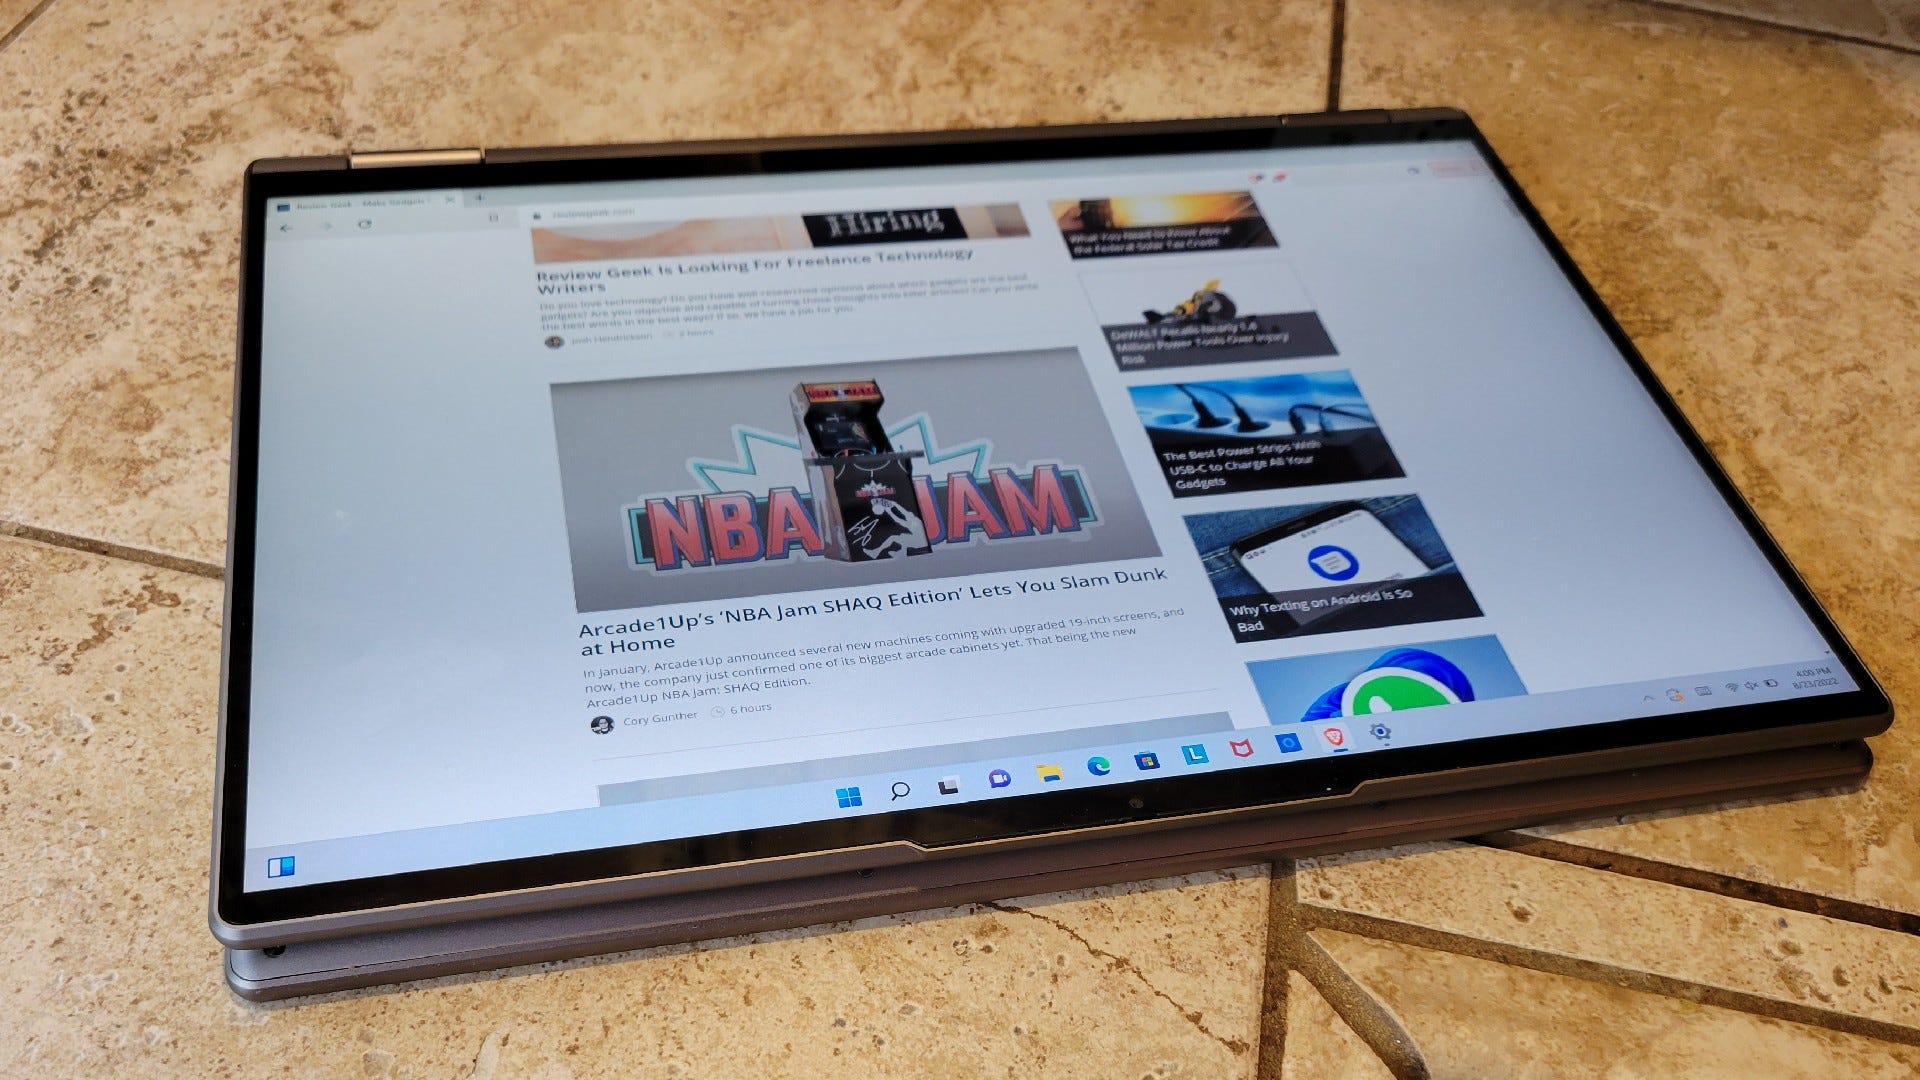 A yoga 7 laid down in tablet mode